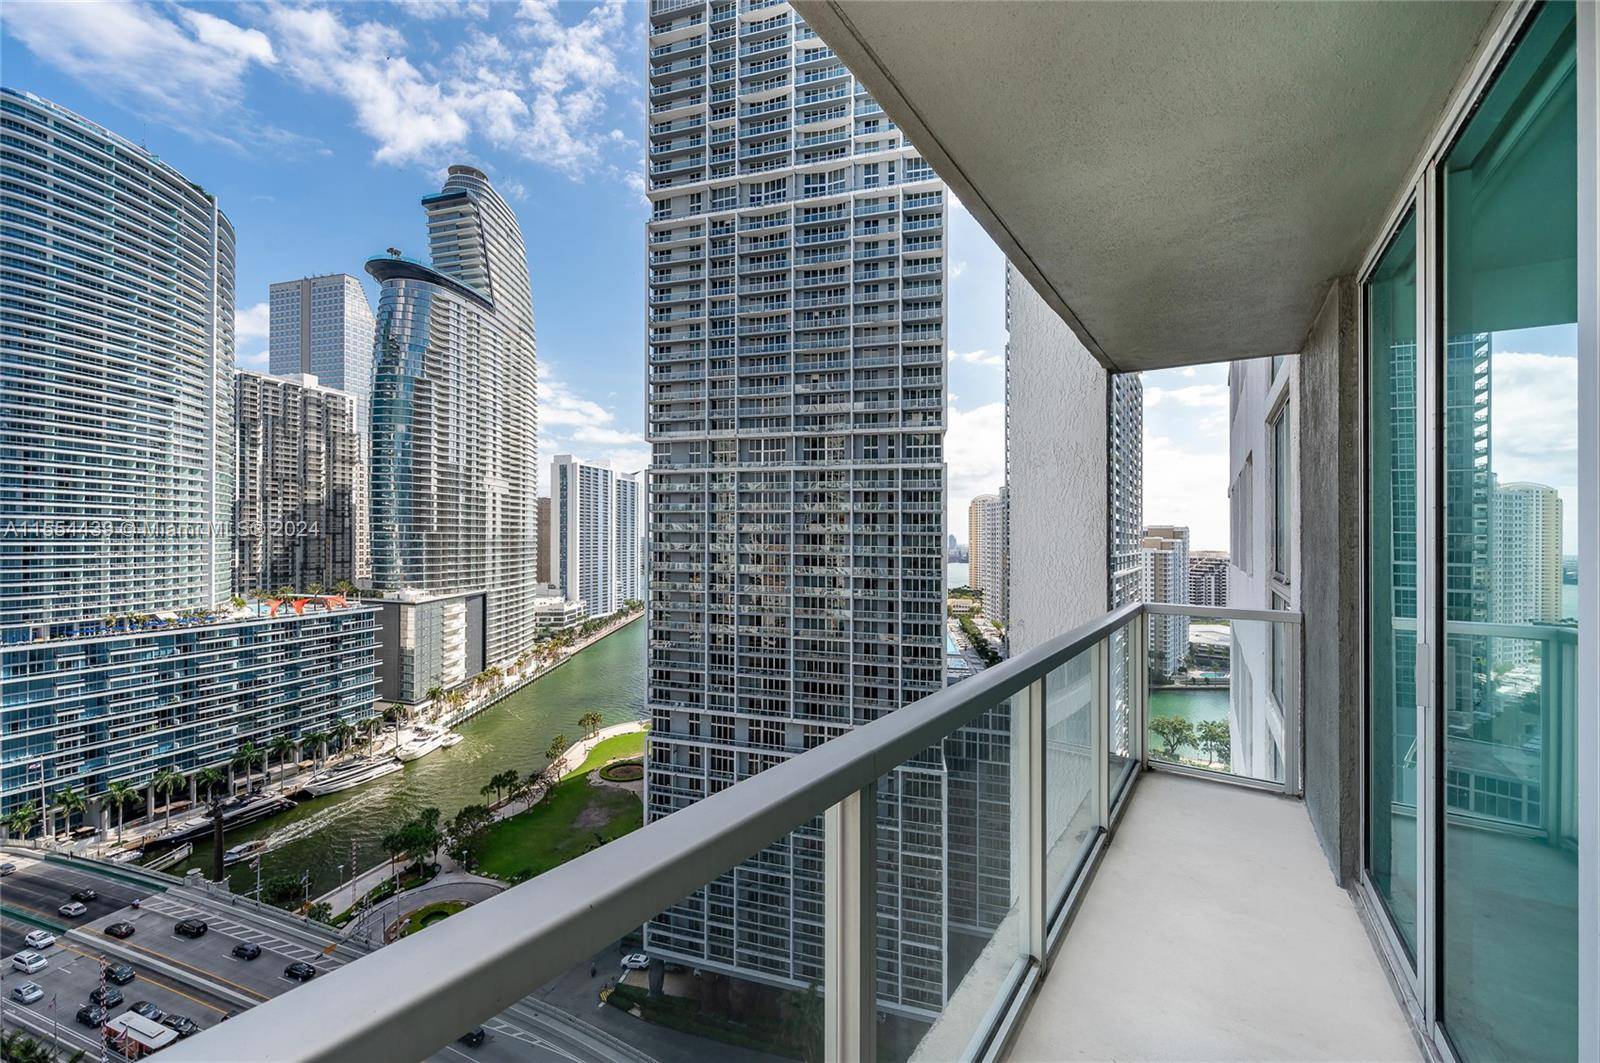 Experience luxury living in the heart of Brickell with this stunning 1 bedroom, 1 bathroom unit spanning 754 square feet.